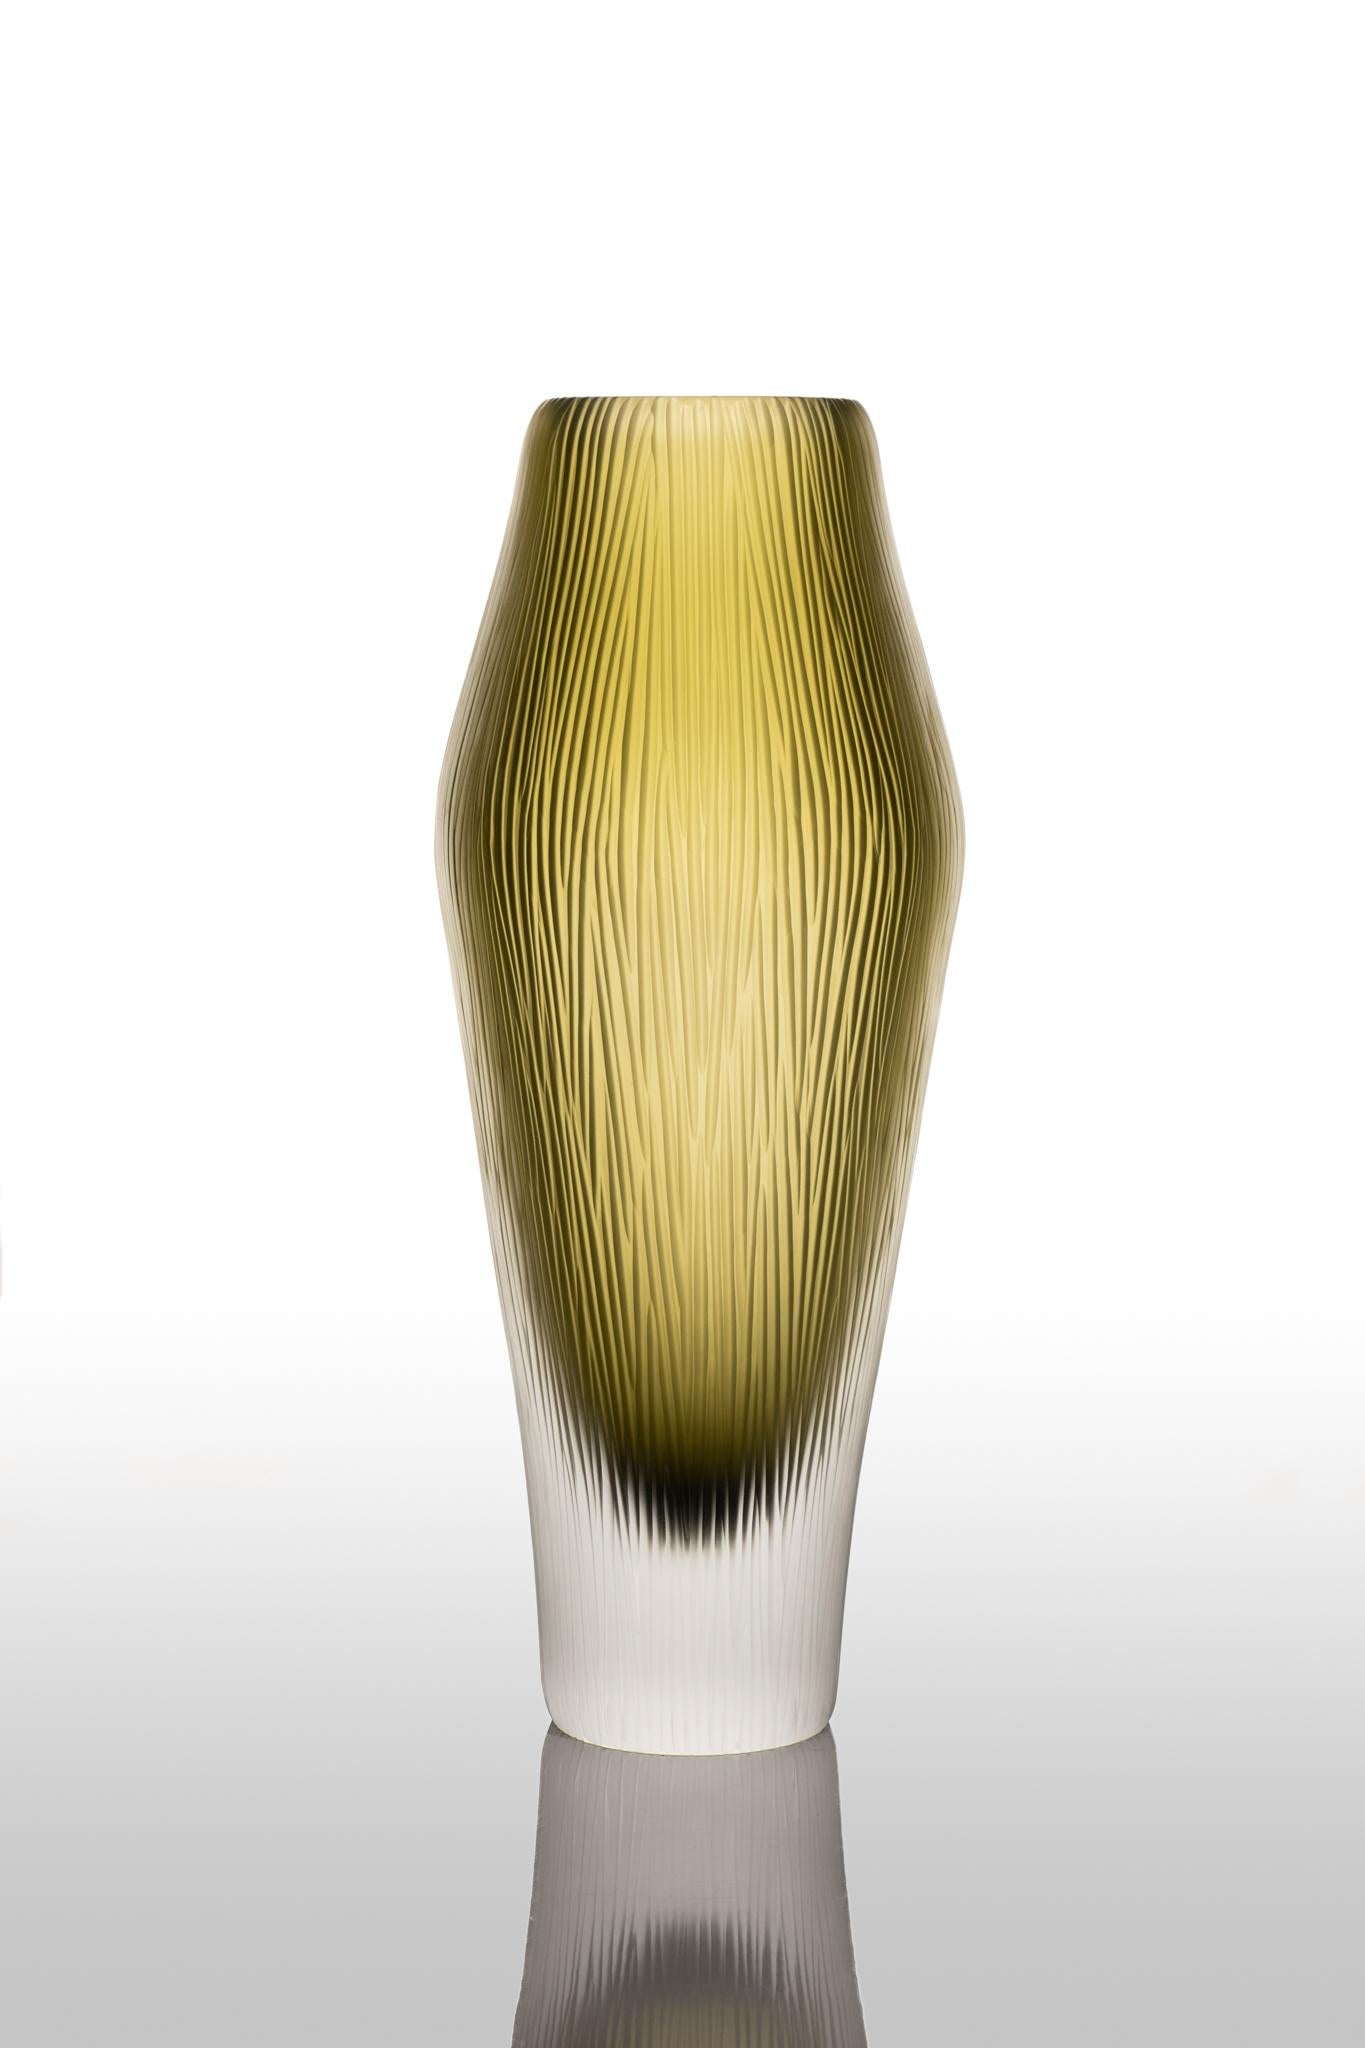 Puparin vase by Purho
Dimensions: D12 x H32 cm
Materials: Murano glass
Available in other colors.

Puparìn is a vase from the Laguna Collection designed by Ludovica+ Roberto Palomba for Purho in spring 2022.
Thin, slender and marked by a thick